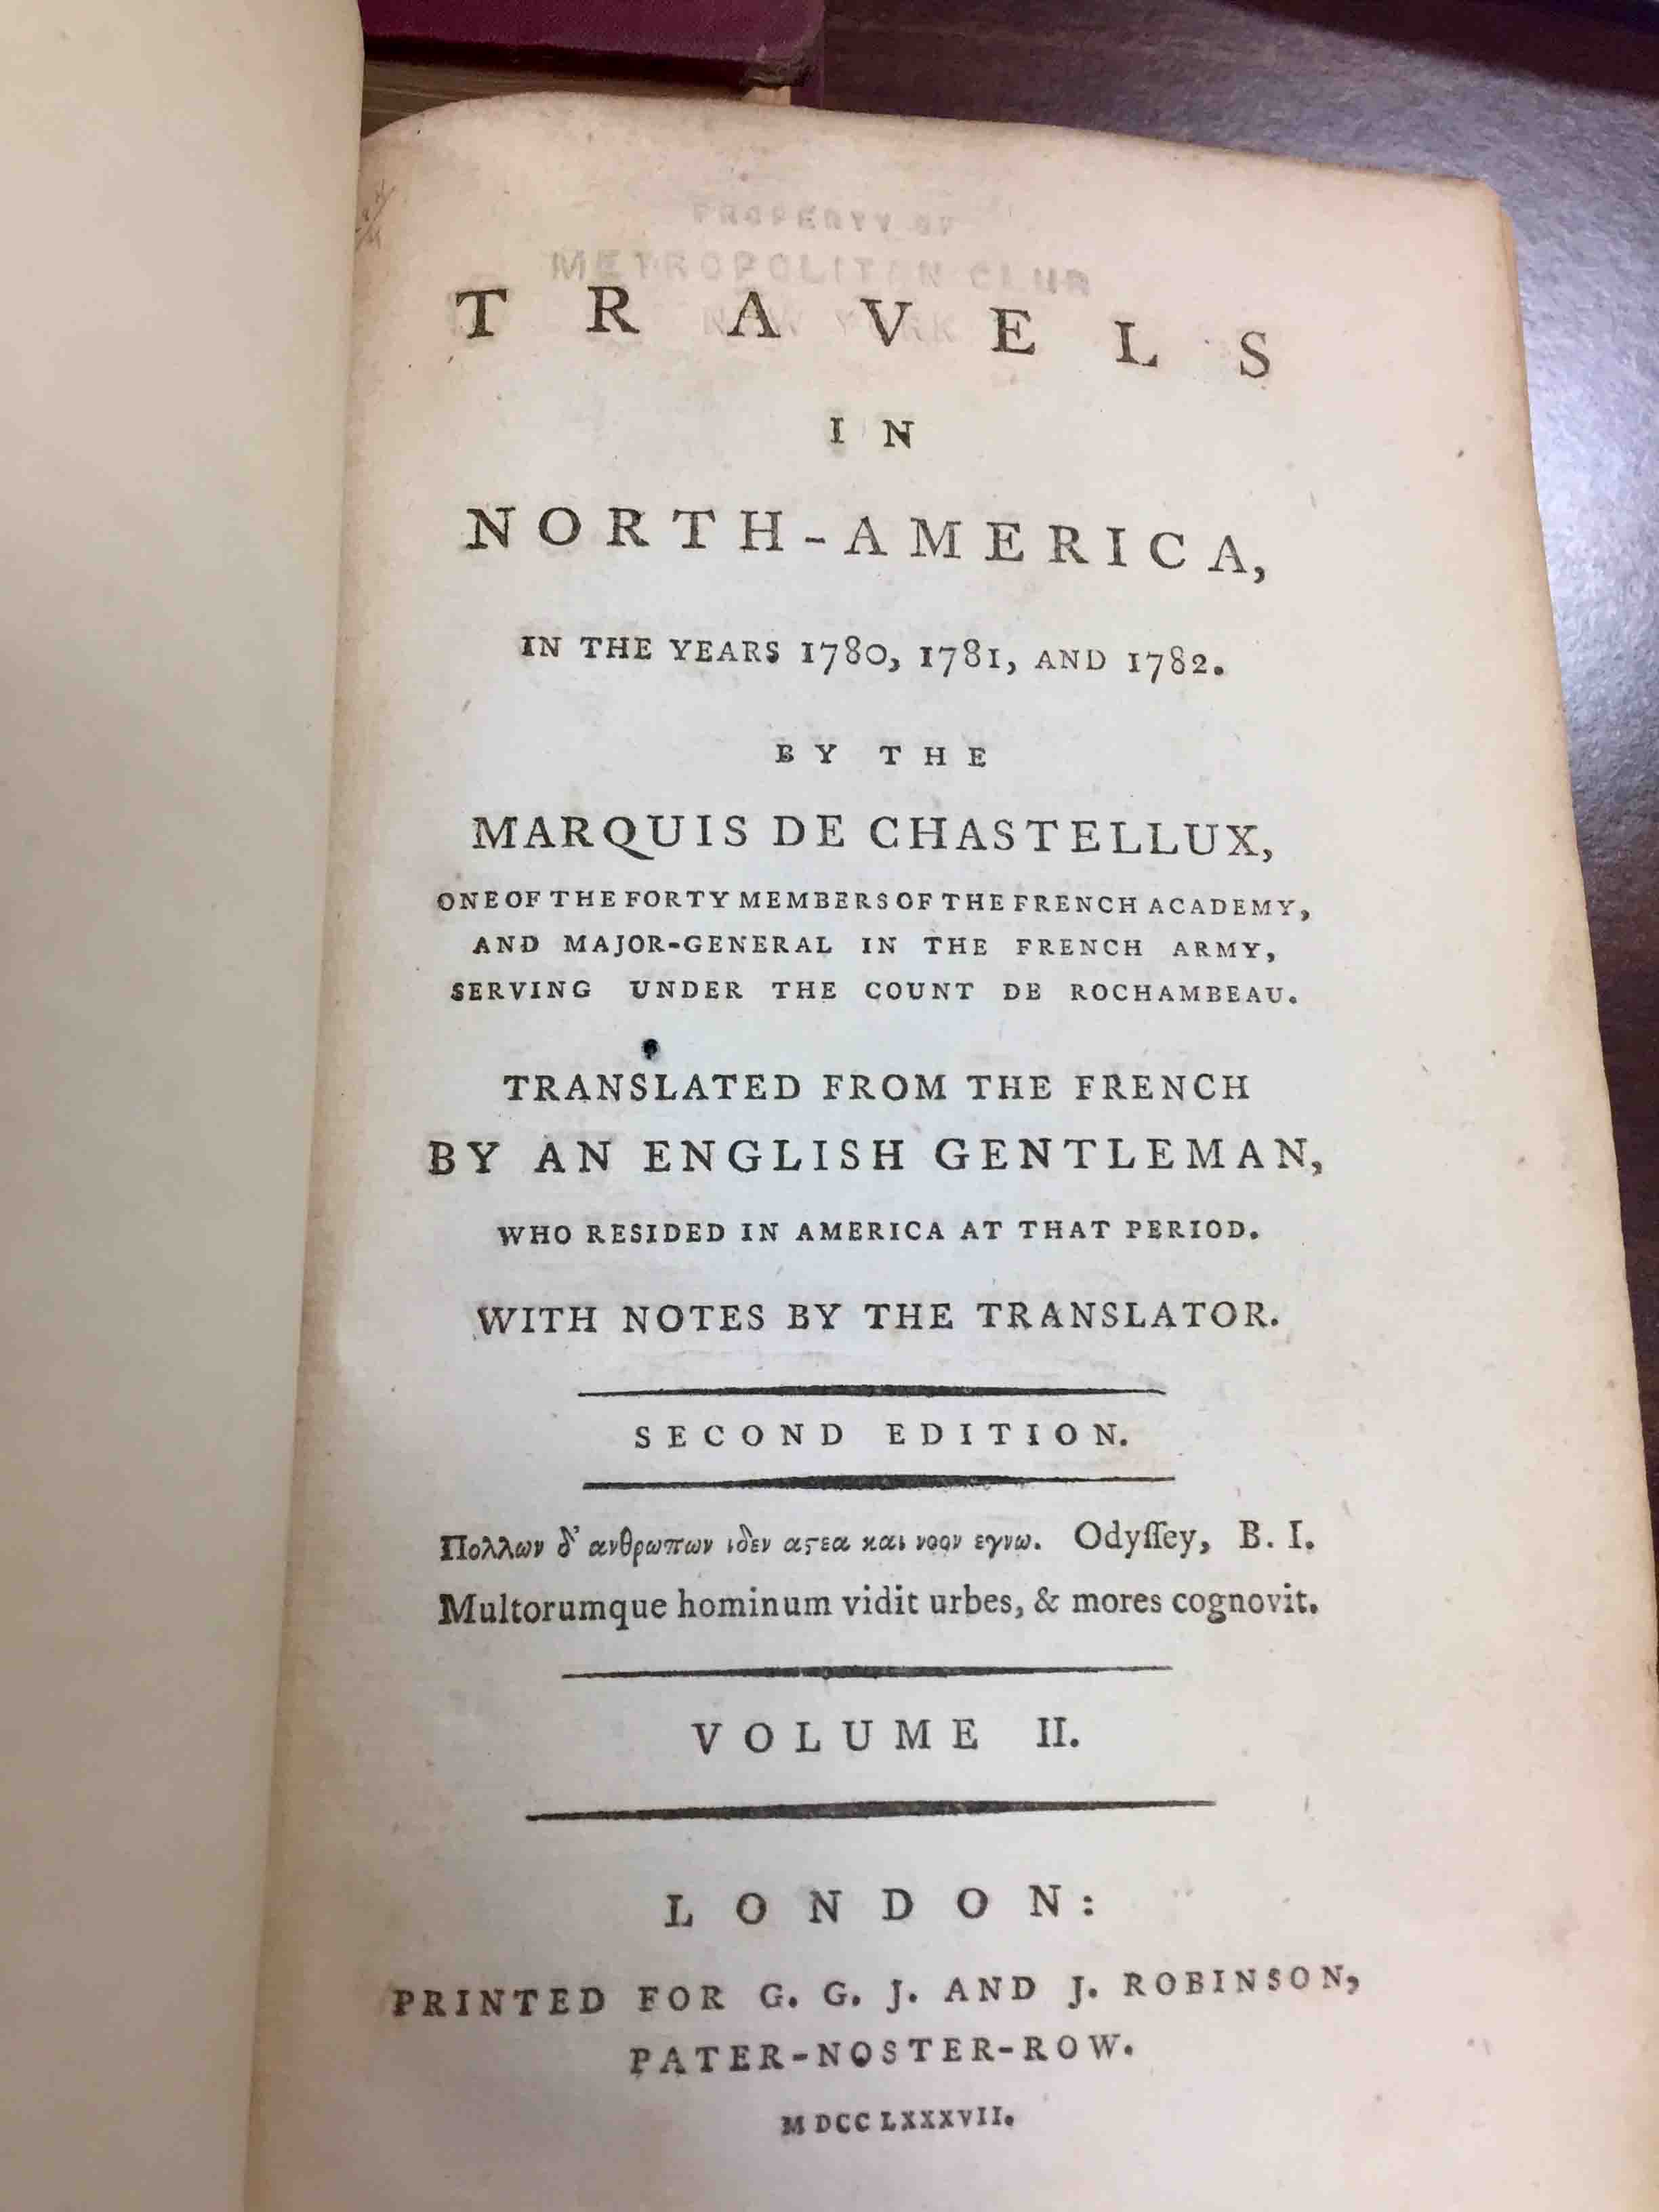 title page from Chastellux 